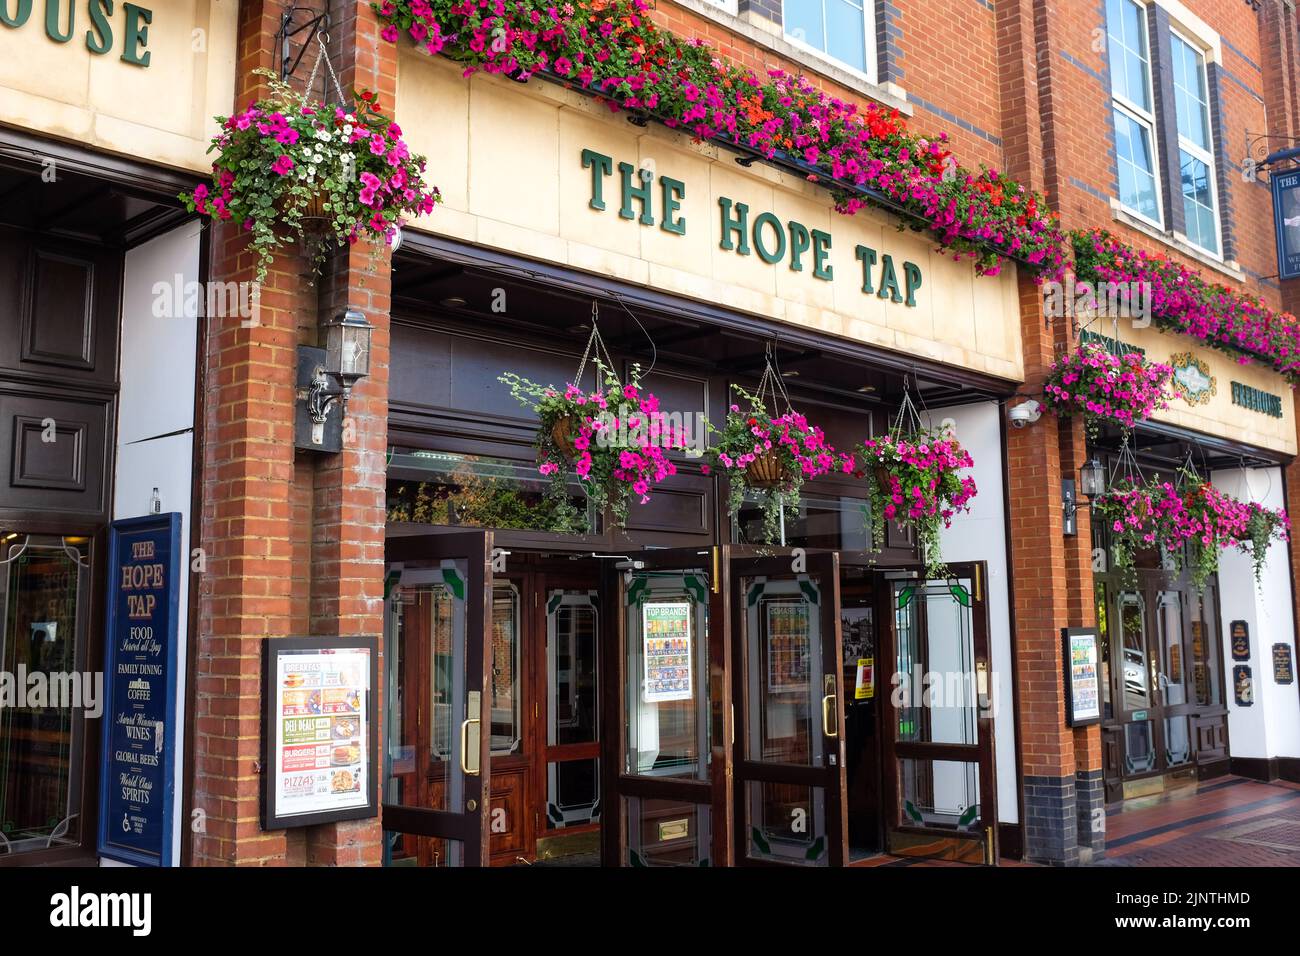 The Hope Tap (Wetherspoon) pub on Friar Street in Reading, Berkshire, England. Stock Photo